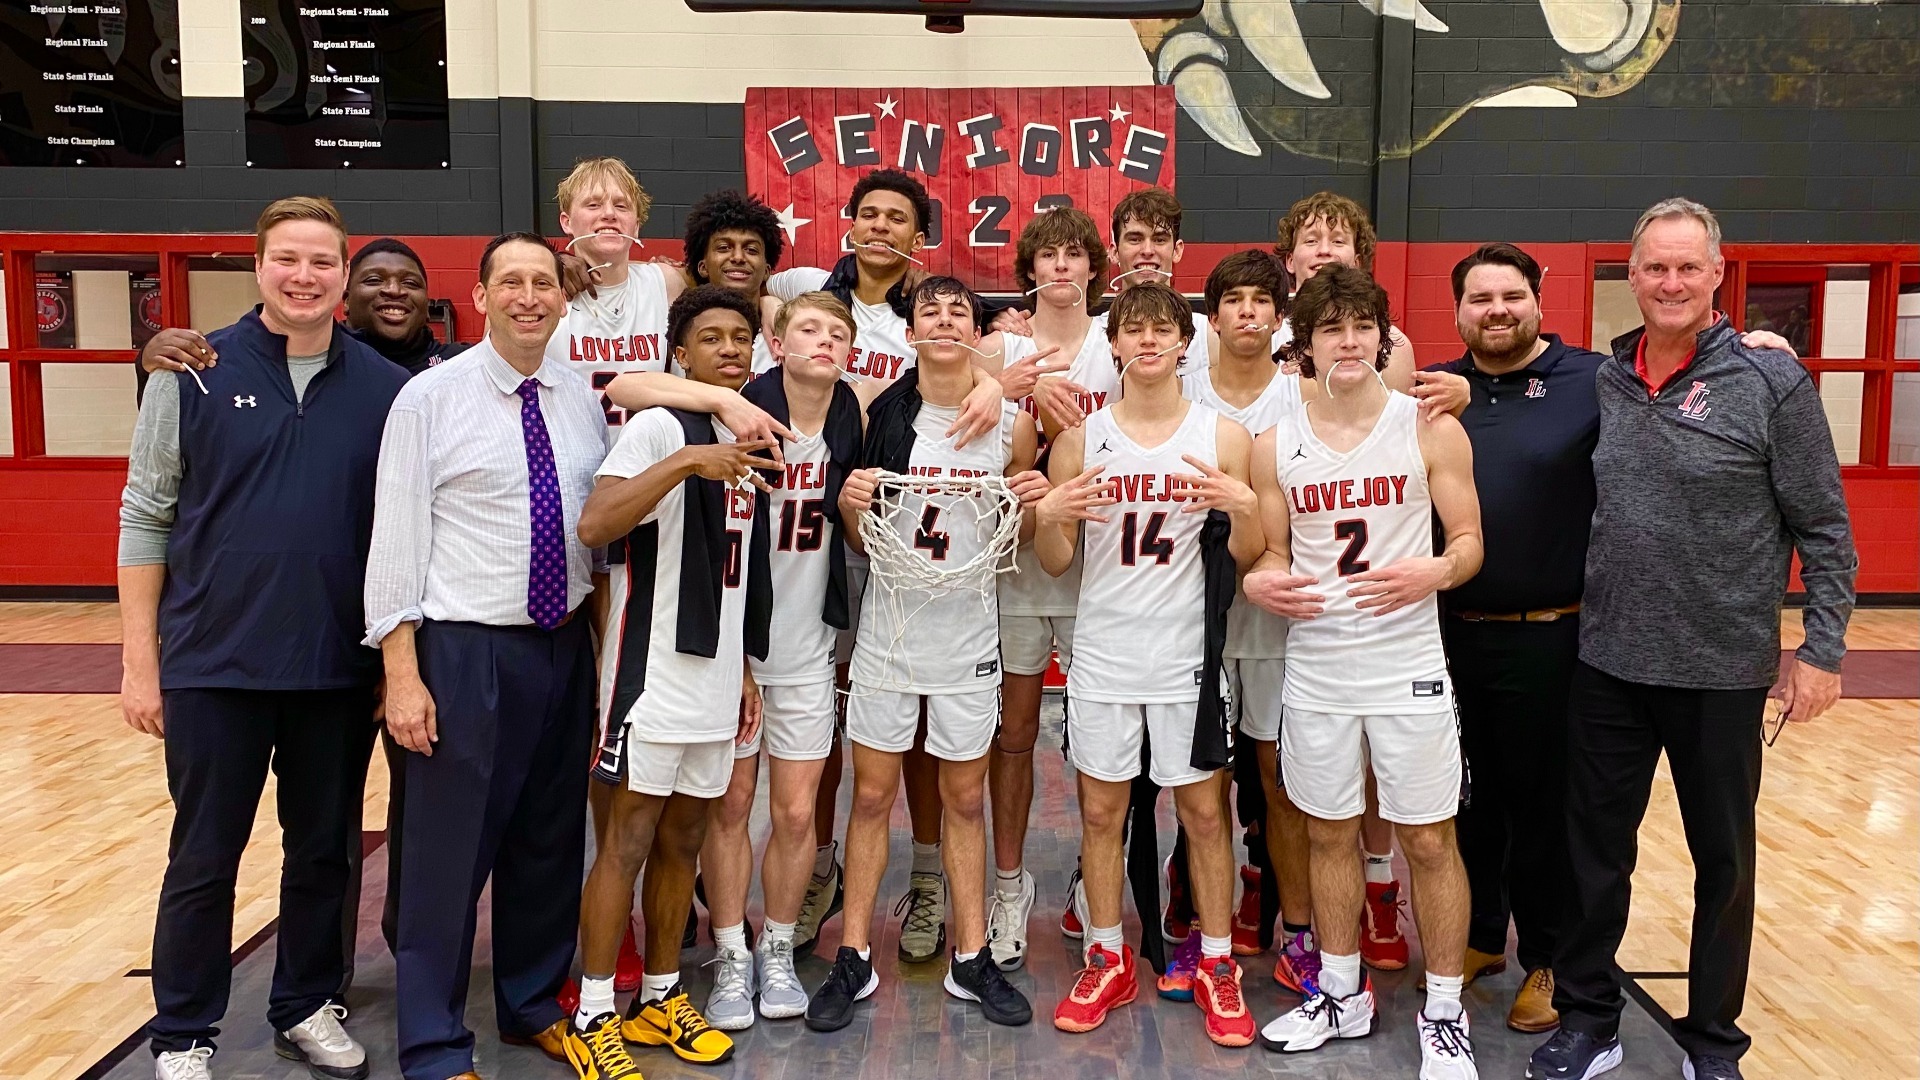 LovejoySlide 9 - Basketball Sets School Records for Wins - District Champions